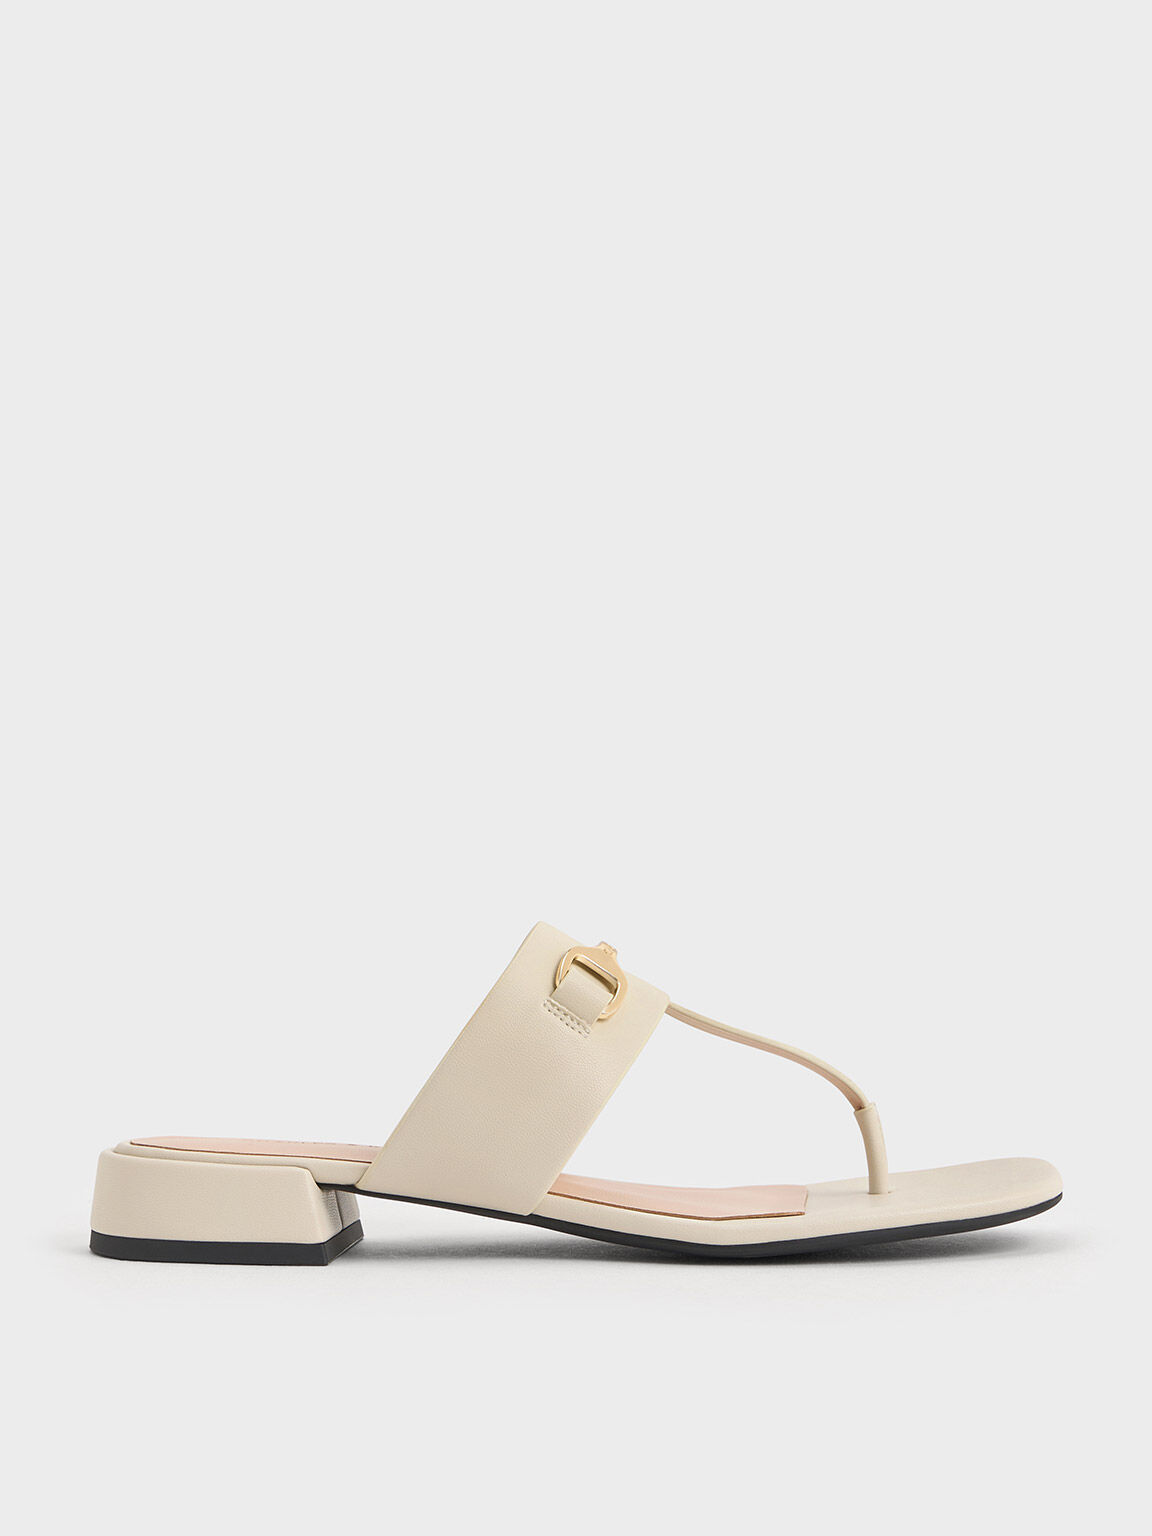 Black Metallic Accent T-Bar Thong Sandals - CHARLES & KEITH IT